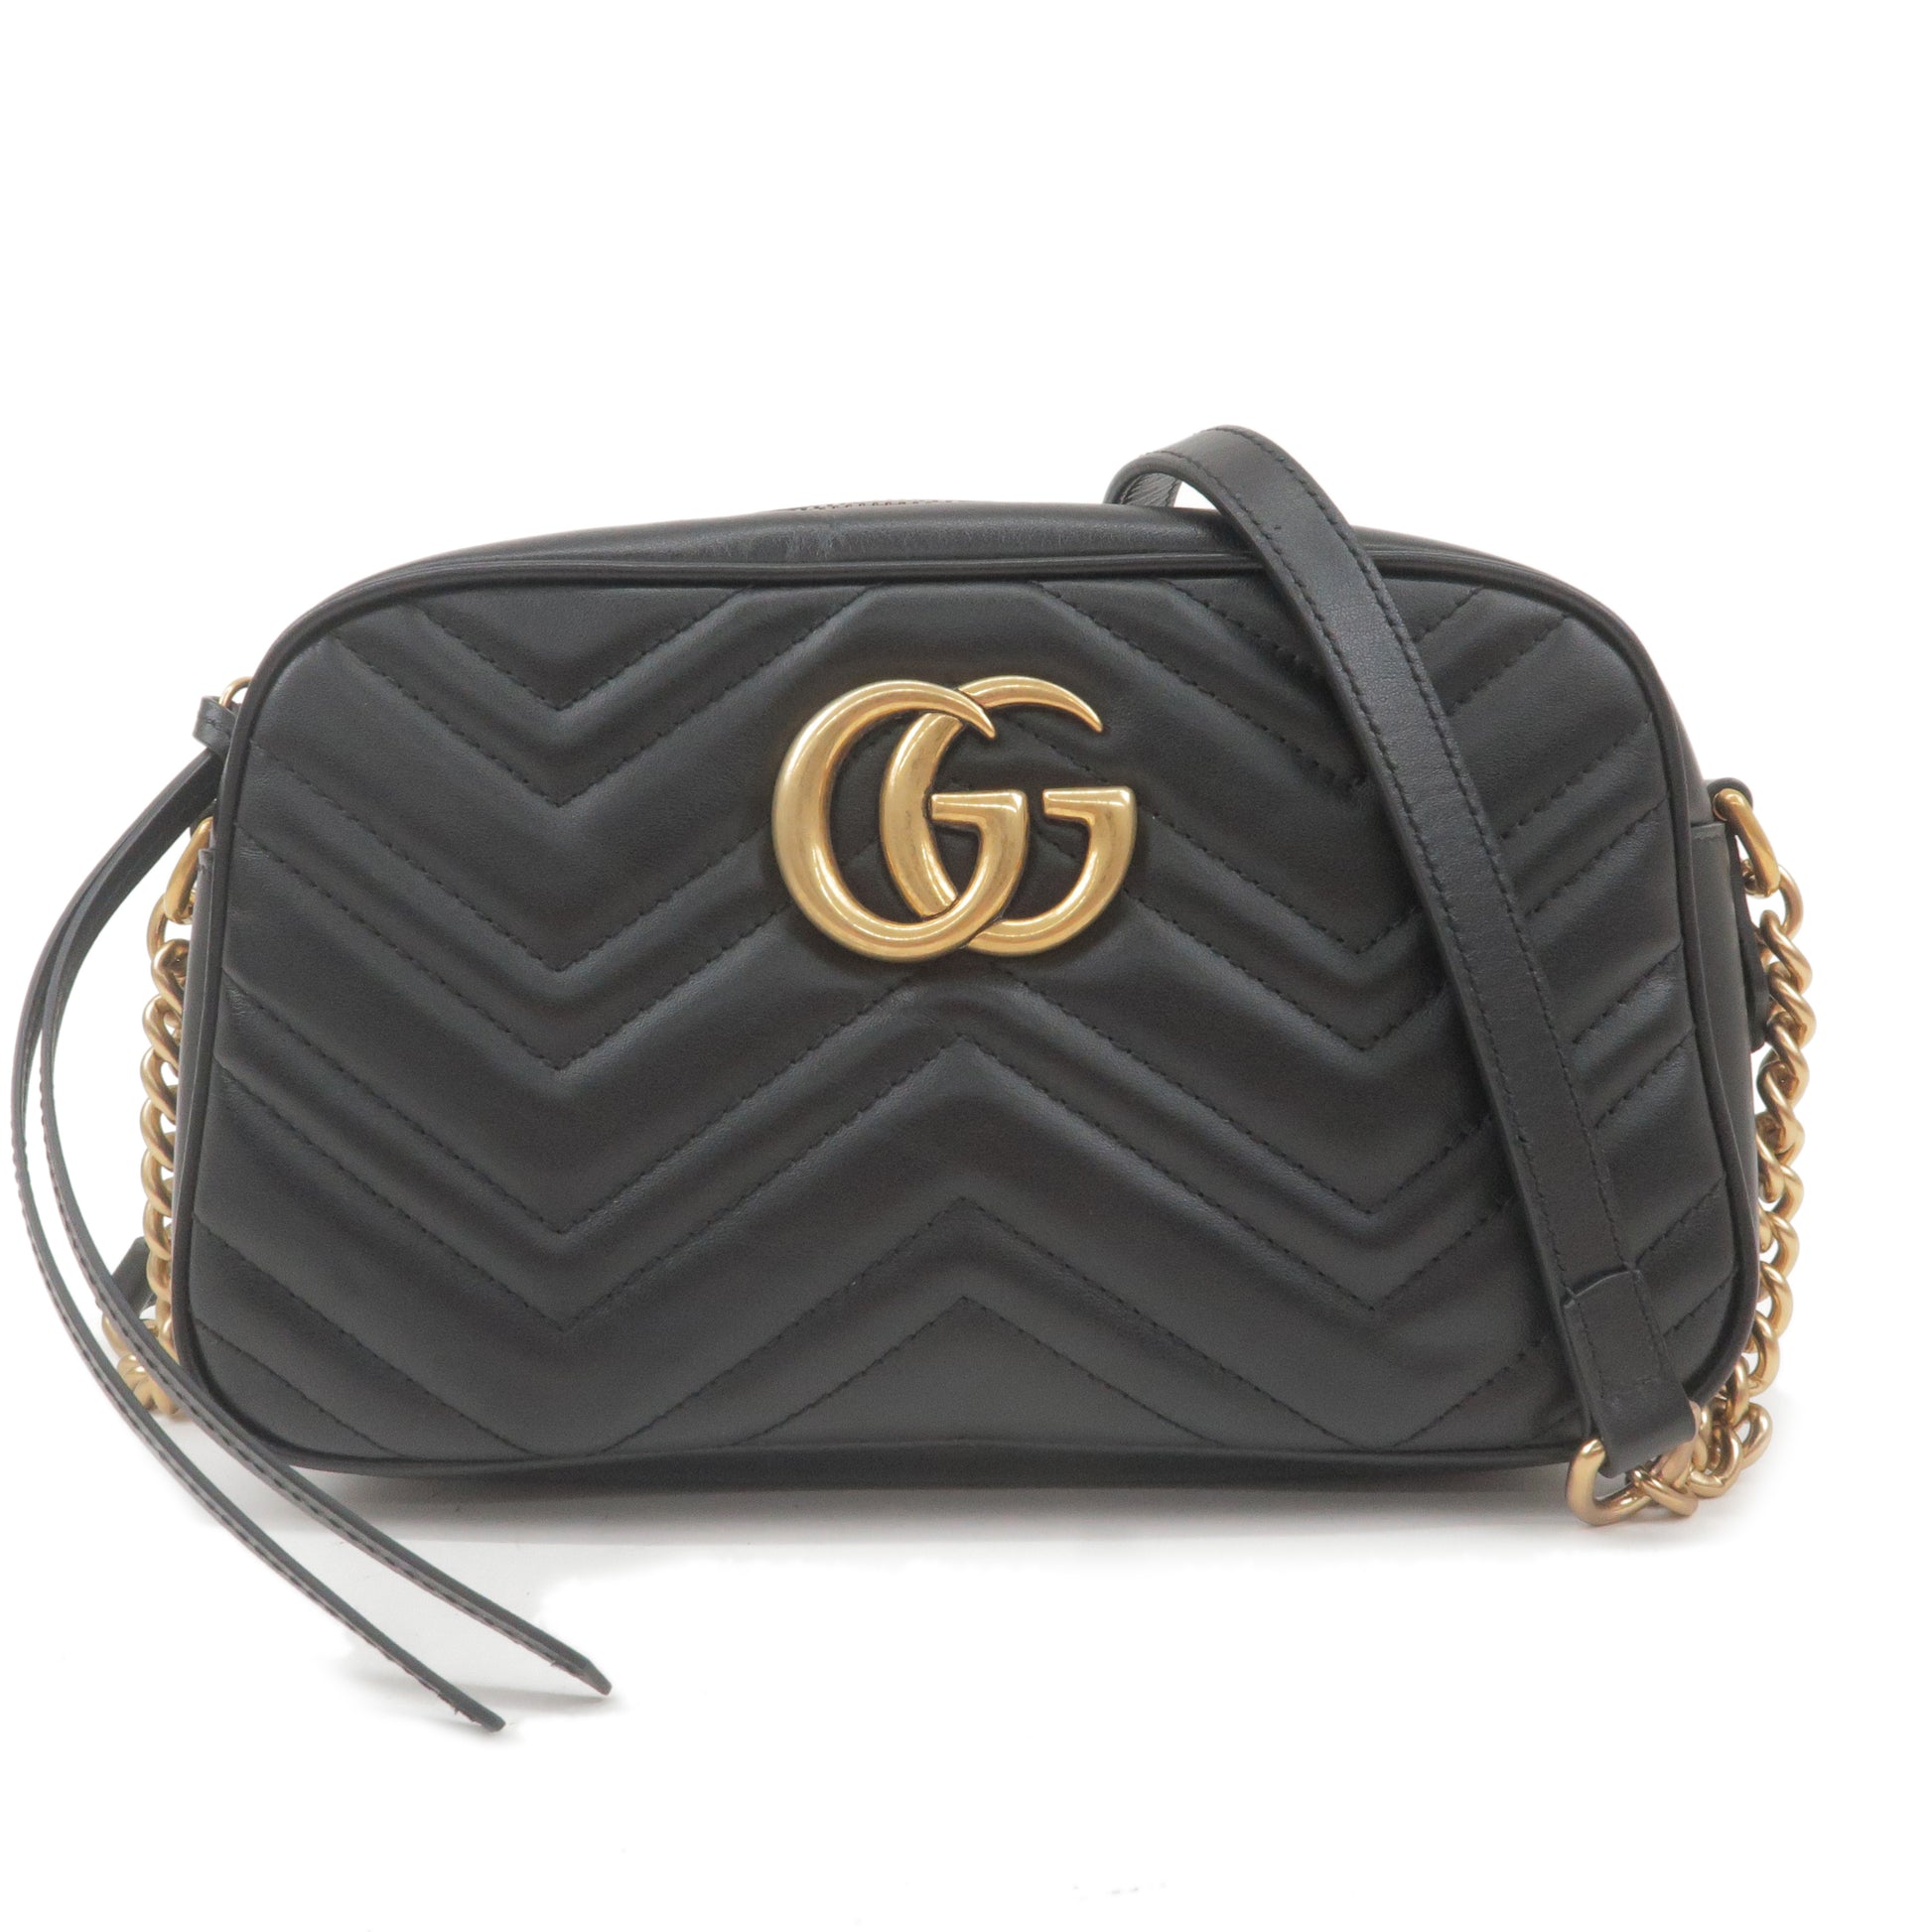 GUCCI-GG-Marmont-Leather-Small-Cross-Body-Bag-Black-447632